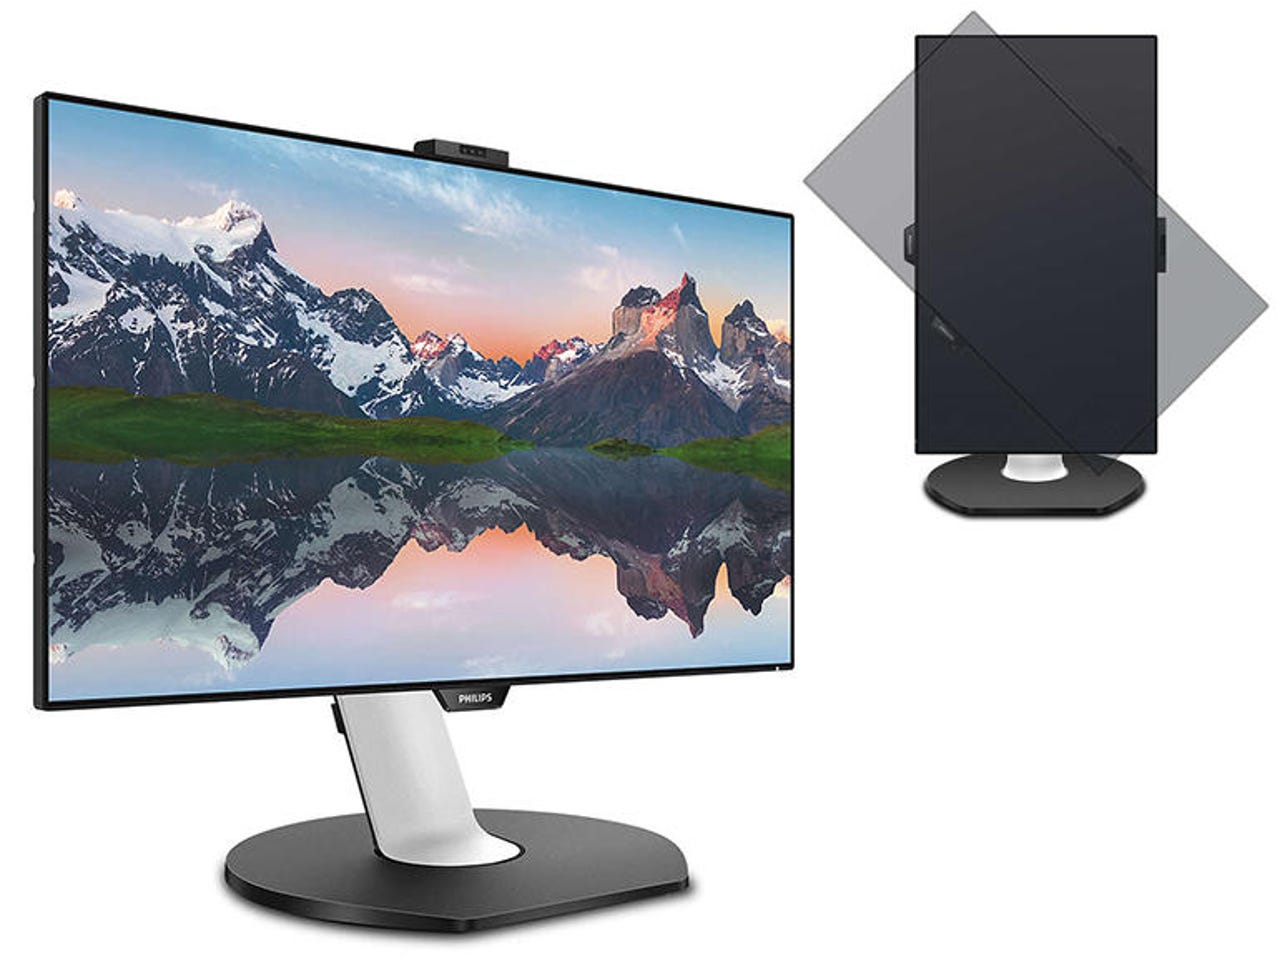 Philips Brilliance LCD Monitor With USB-C Dock (329P9H)